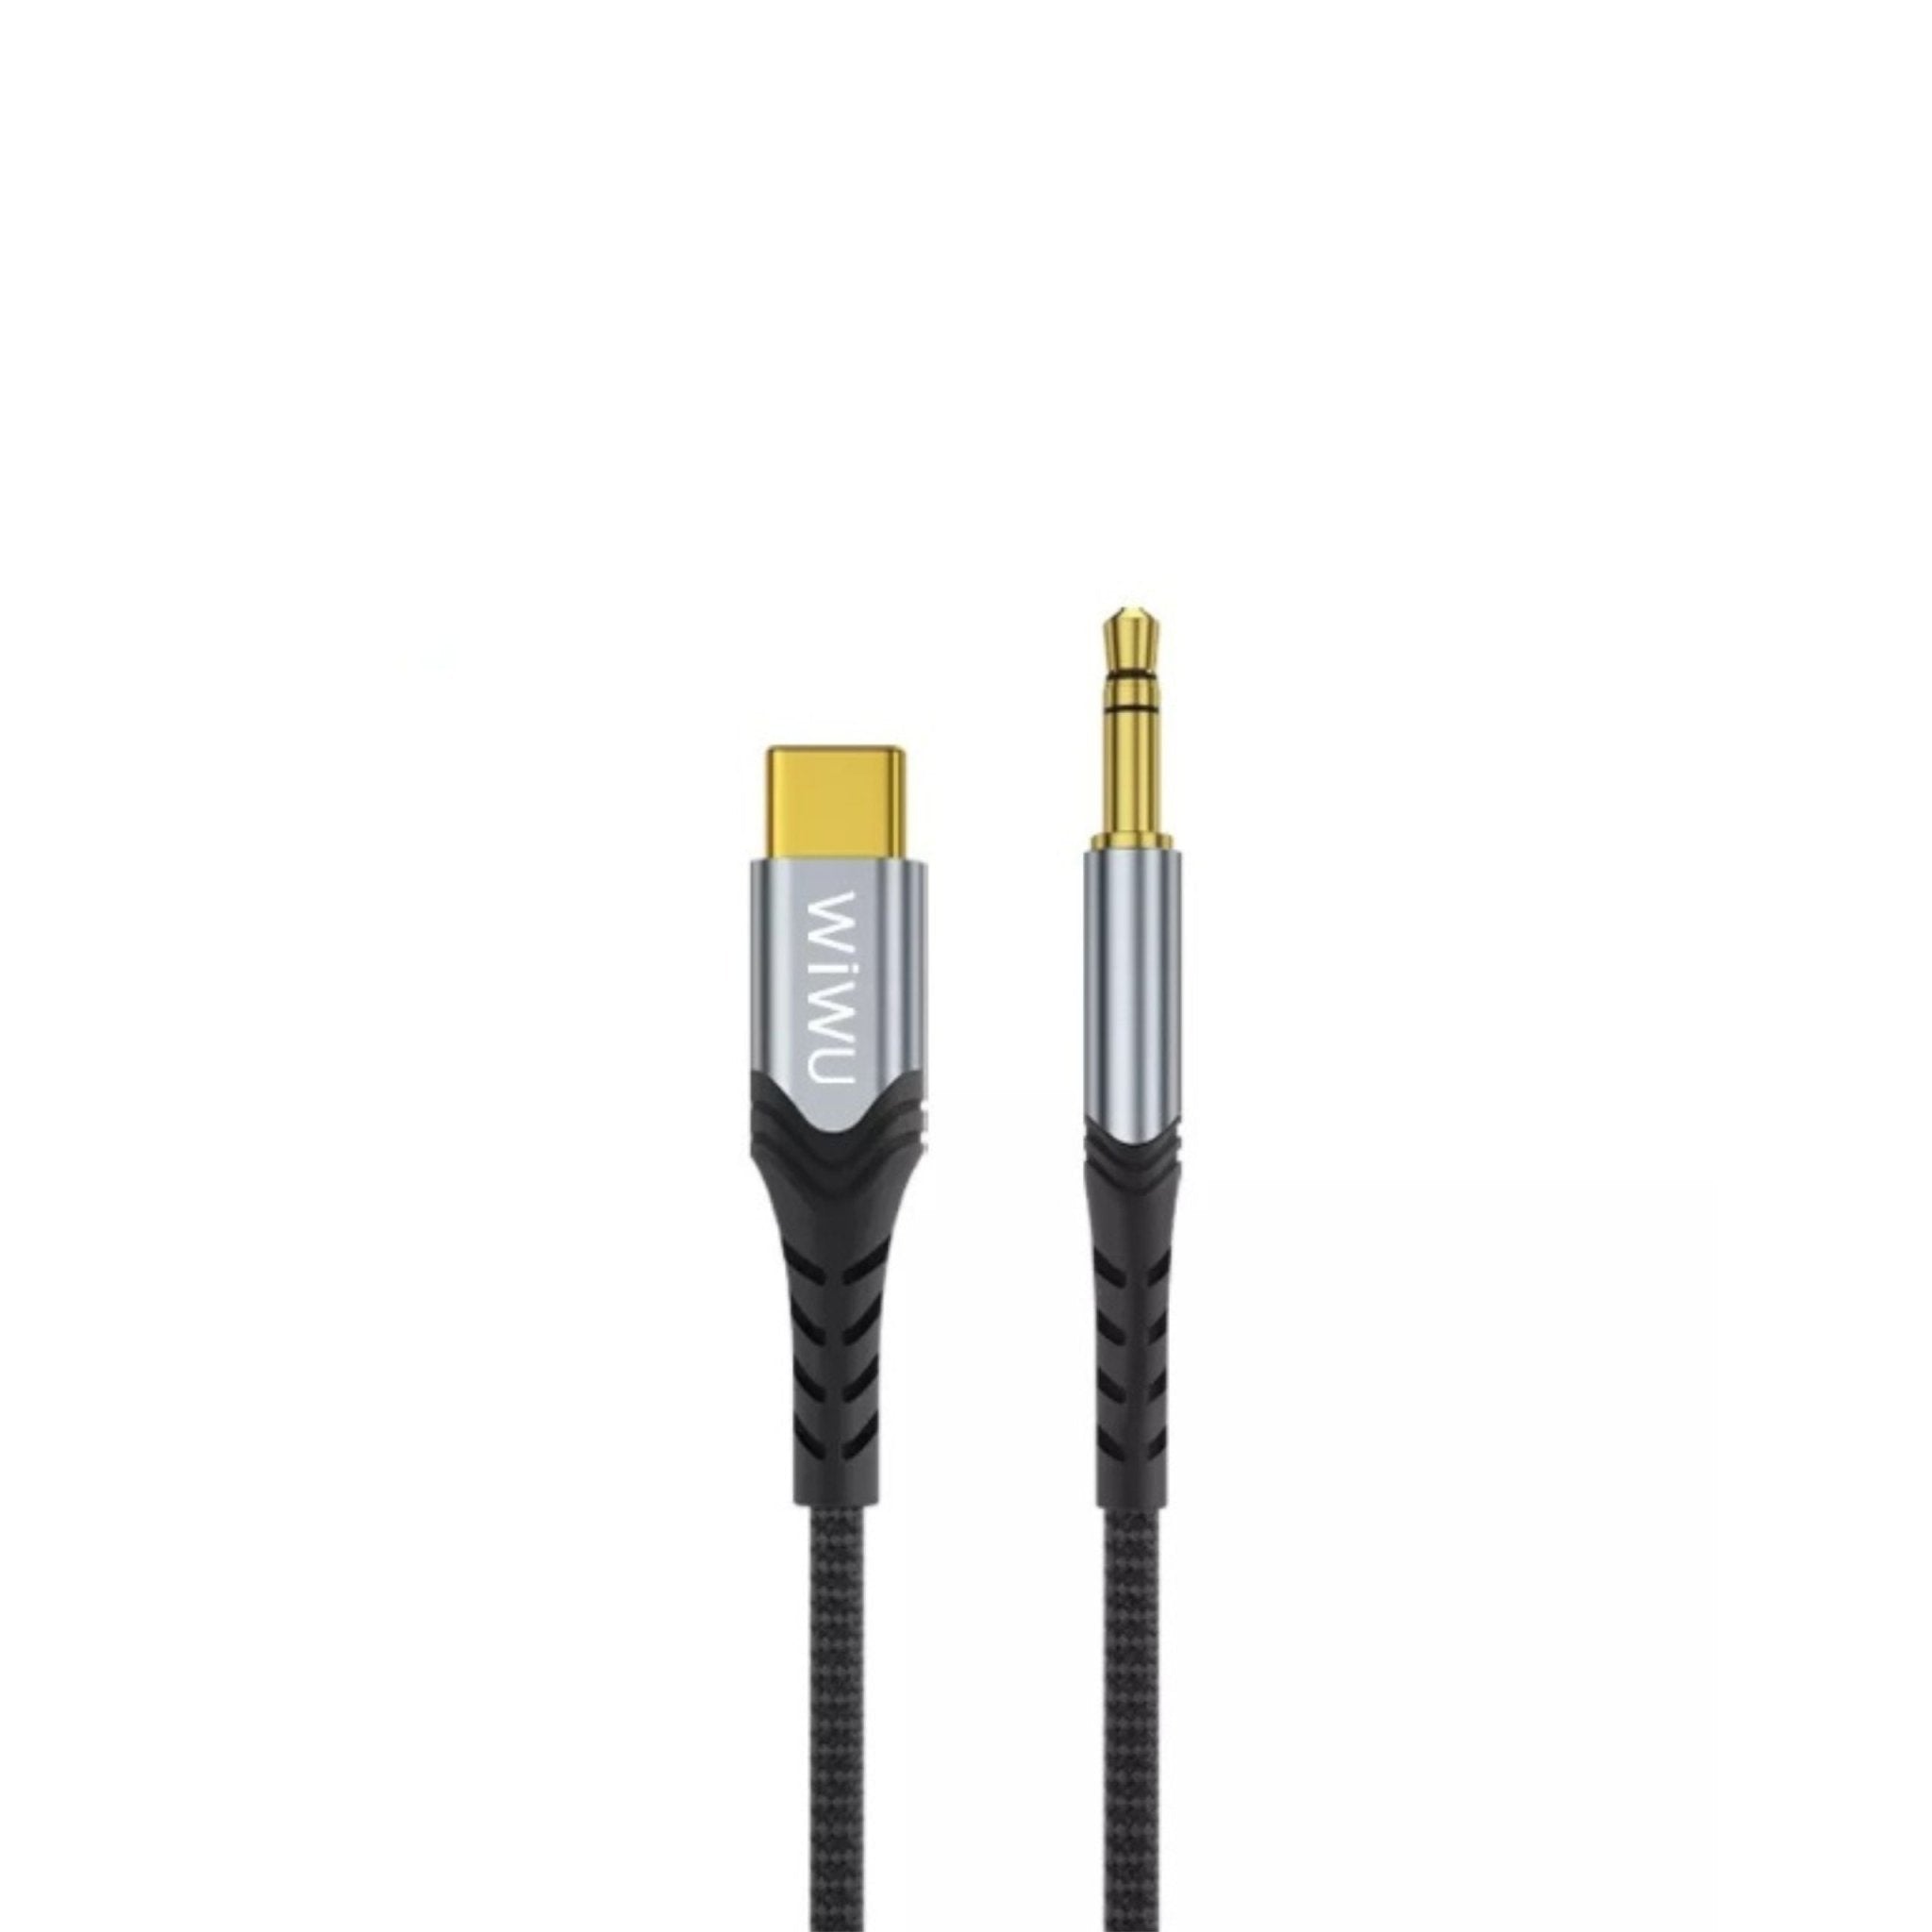 Wiwu 3.5mm Audio Stereo Cable To Type- C - Black